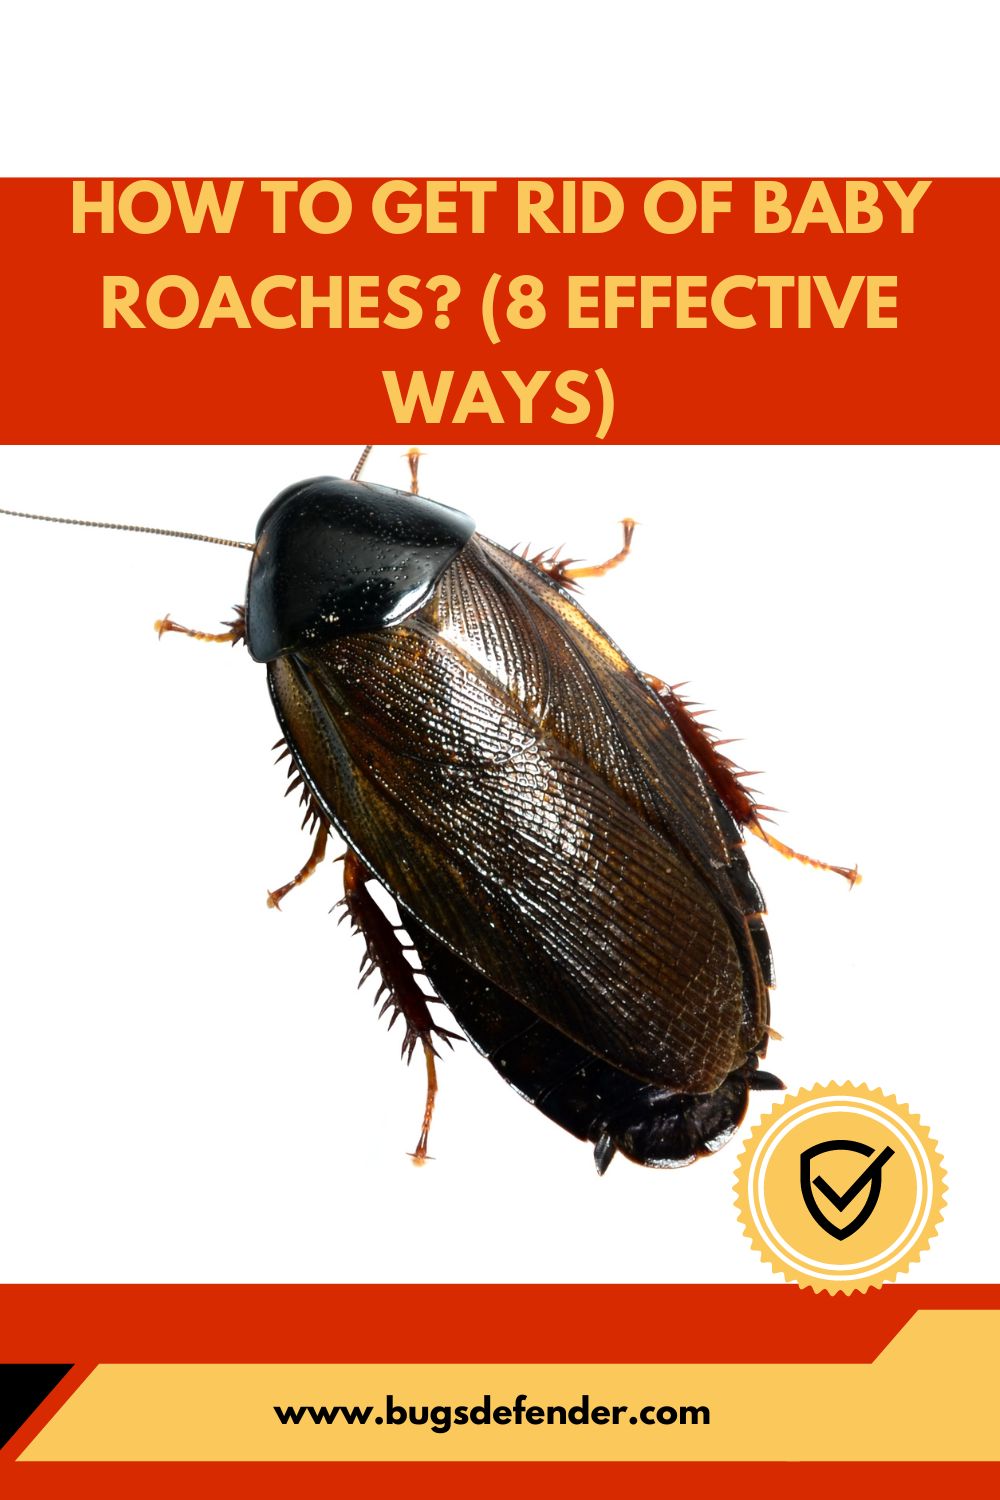 How To Get Rid Of Baby Roaches? (8 Effective Ways) pin 1